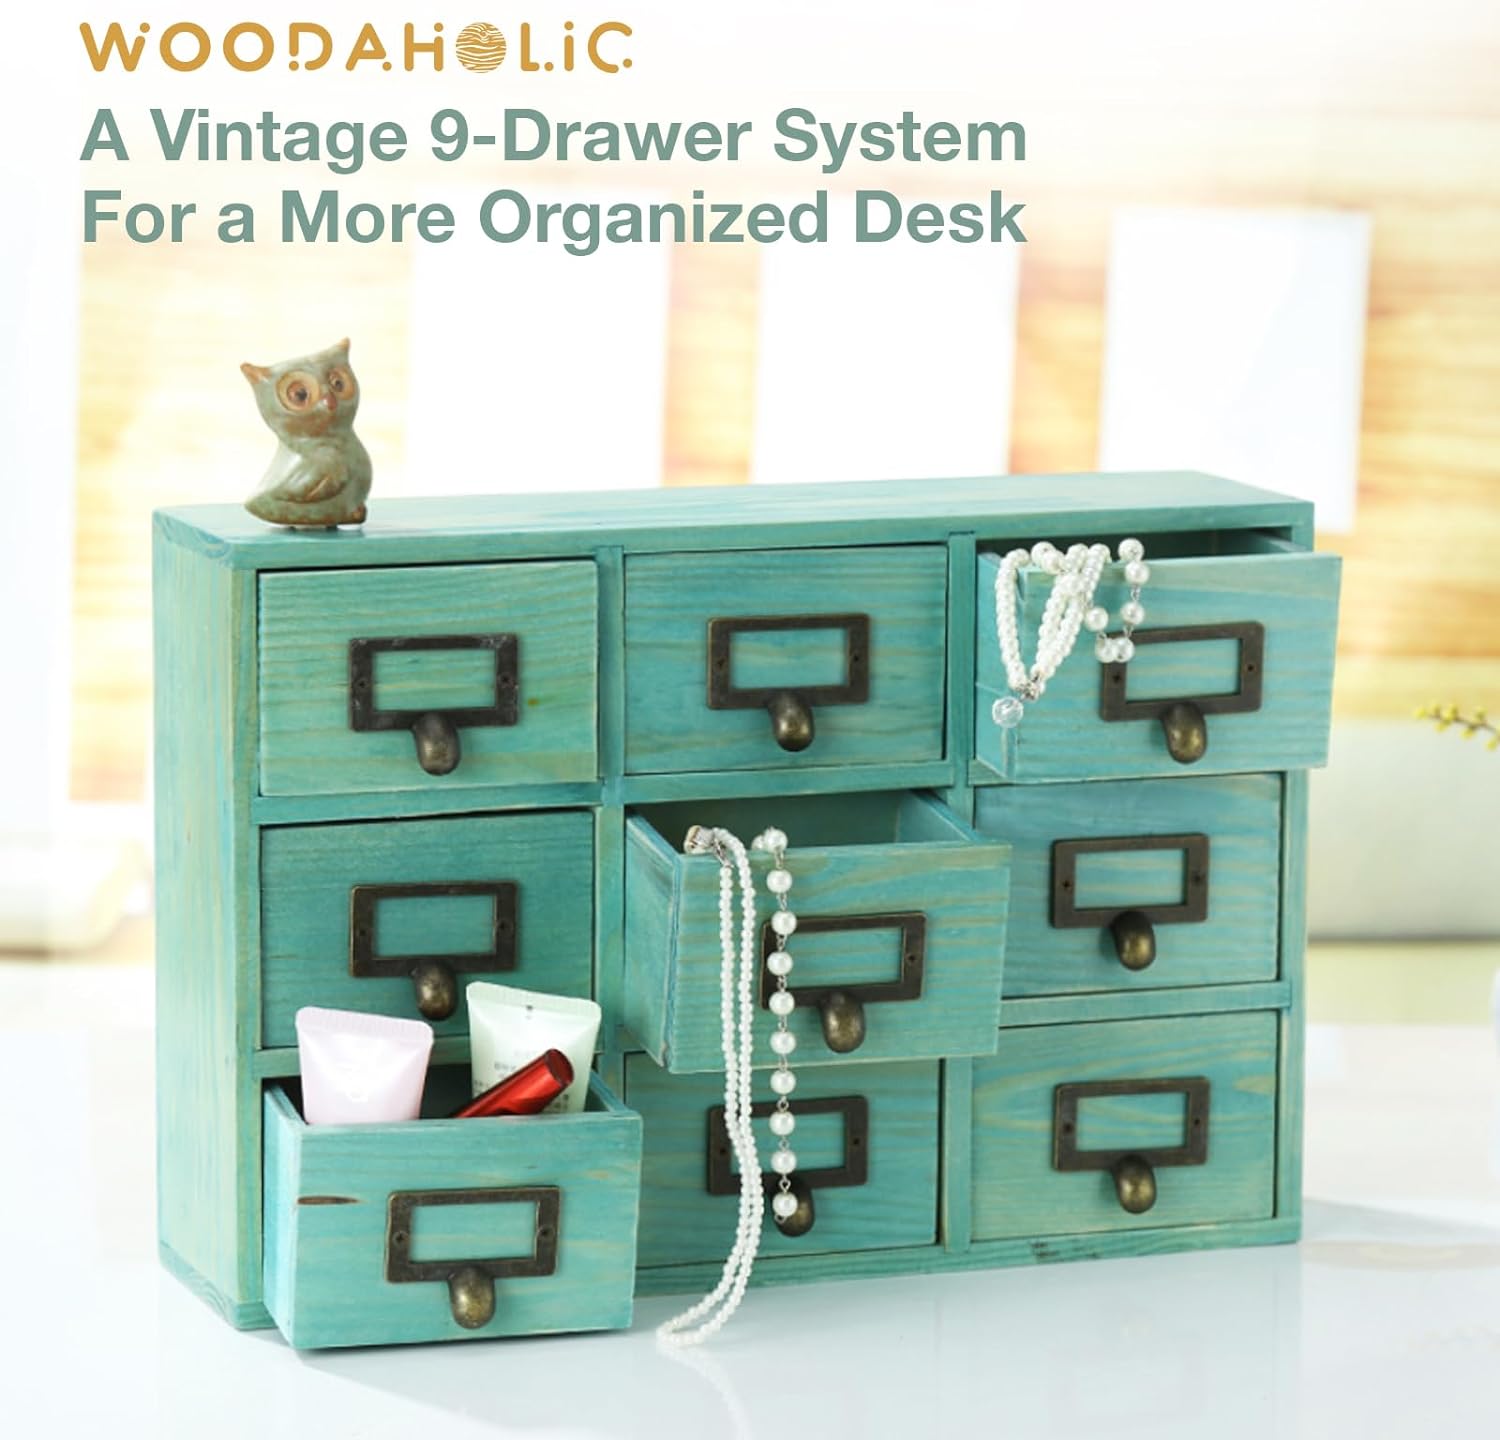 Load image into Gallery viewer, Teal Wooden Drawer Organizer for Desktop - Vintage Apothecary Cabinet With 9 Drawers - Wood Desk Organizer